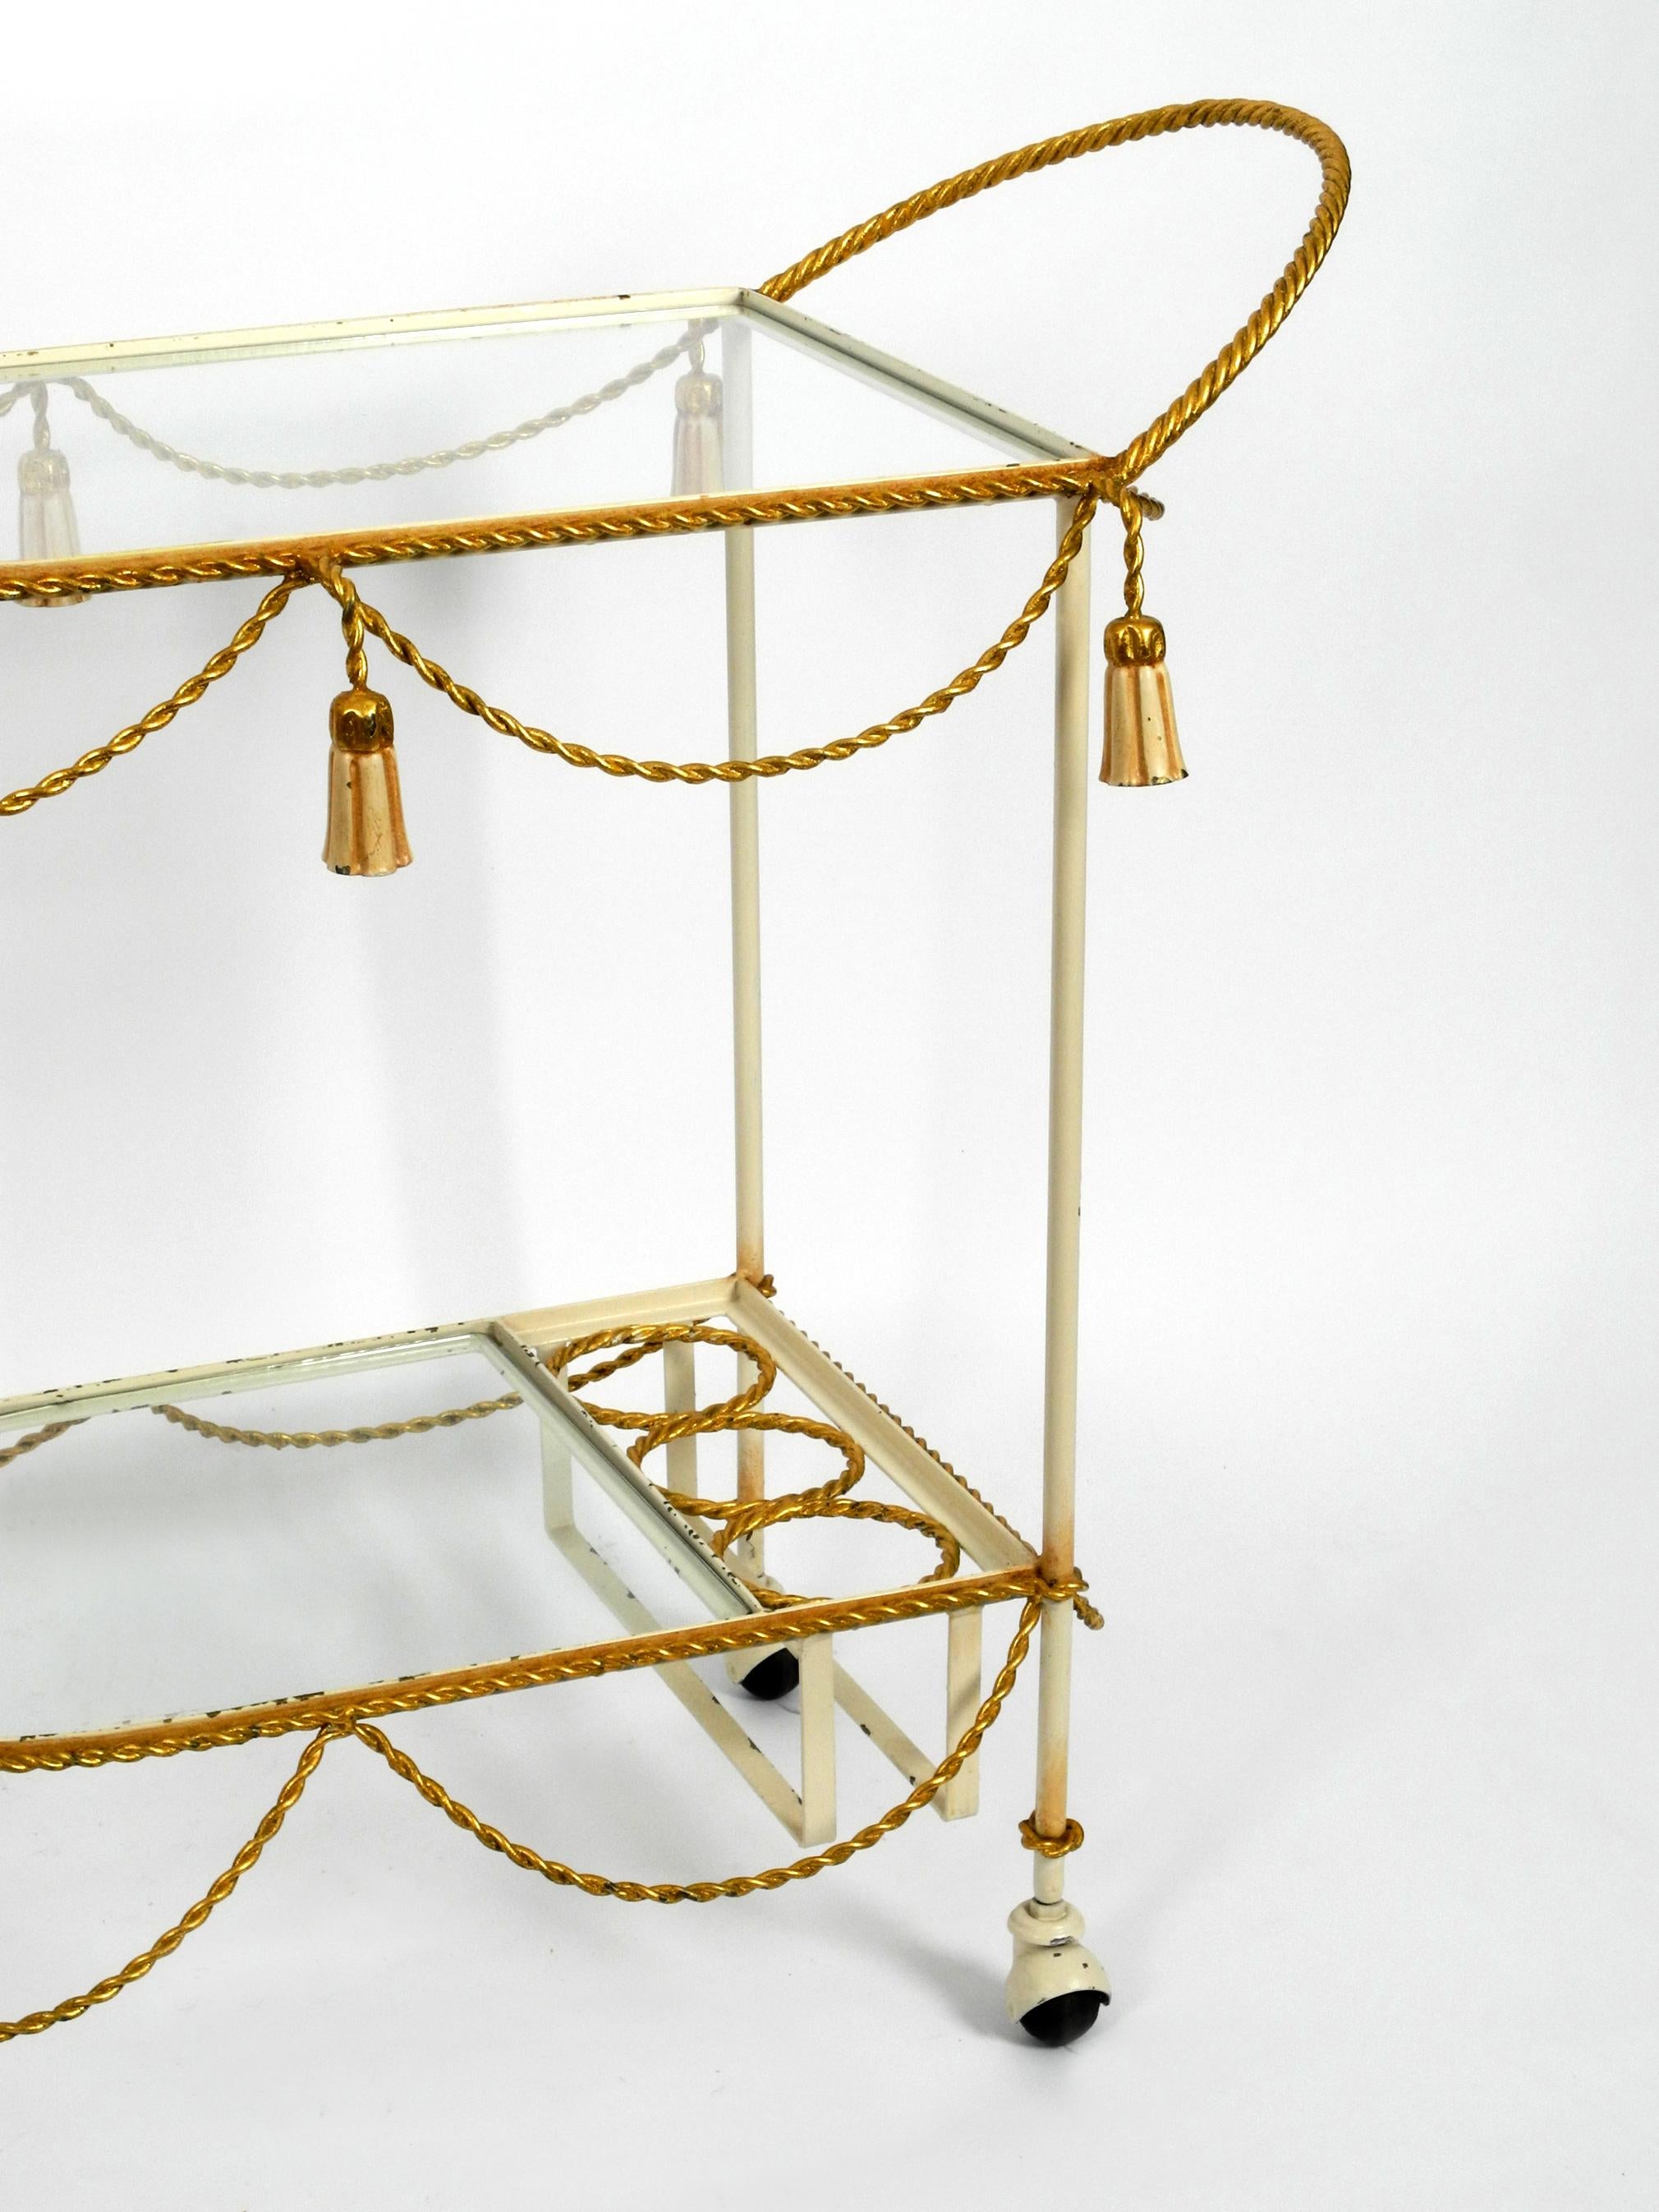 Italian Midcentury Bar Cart Made of Metal in Beige and Gold with Glass Elements For Sale 4